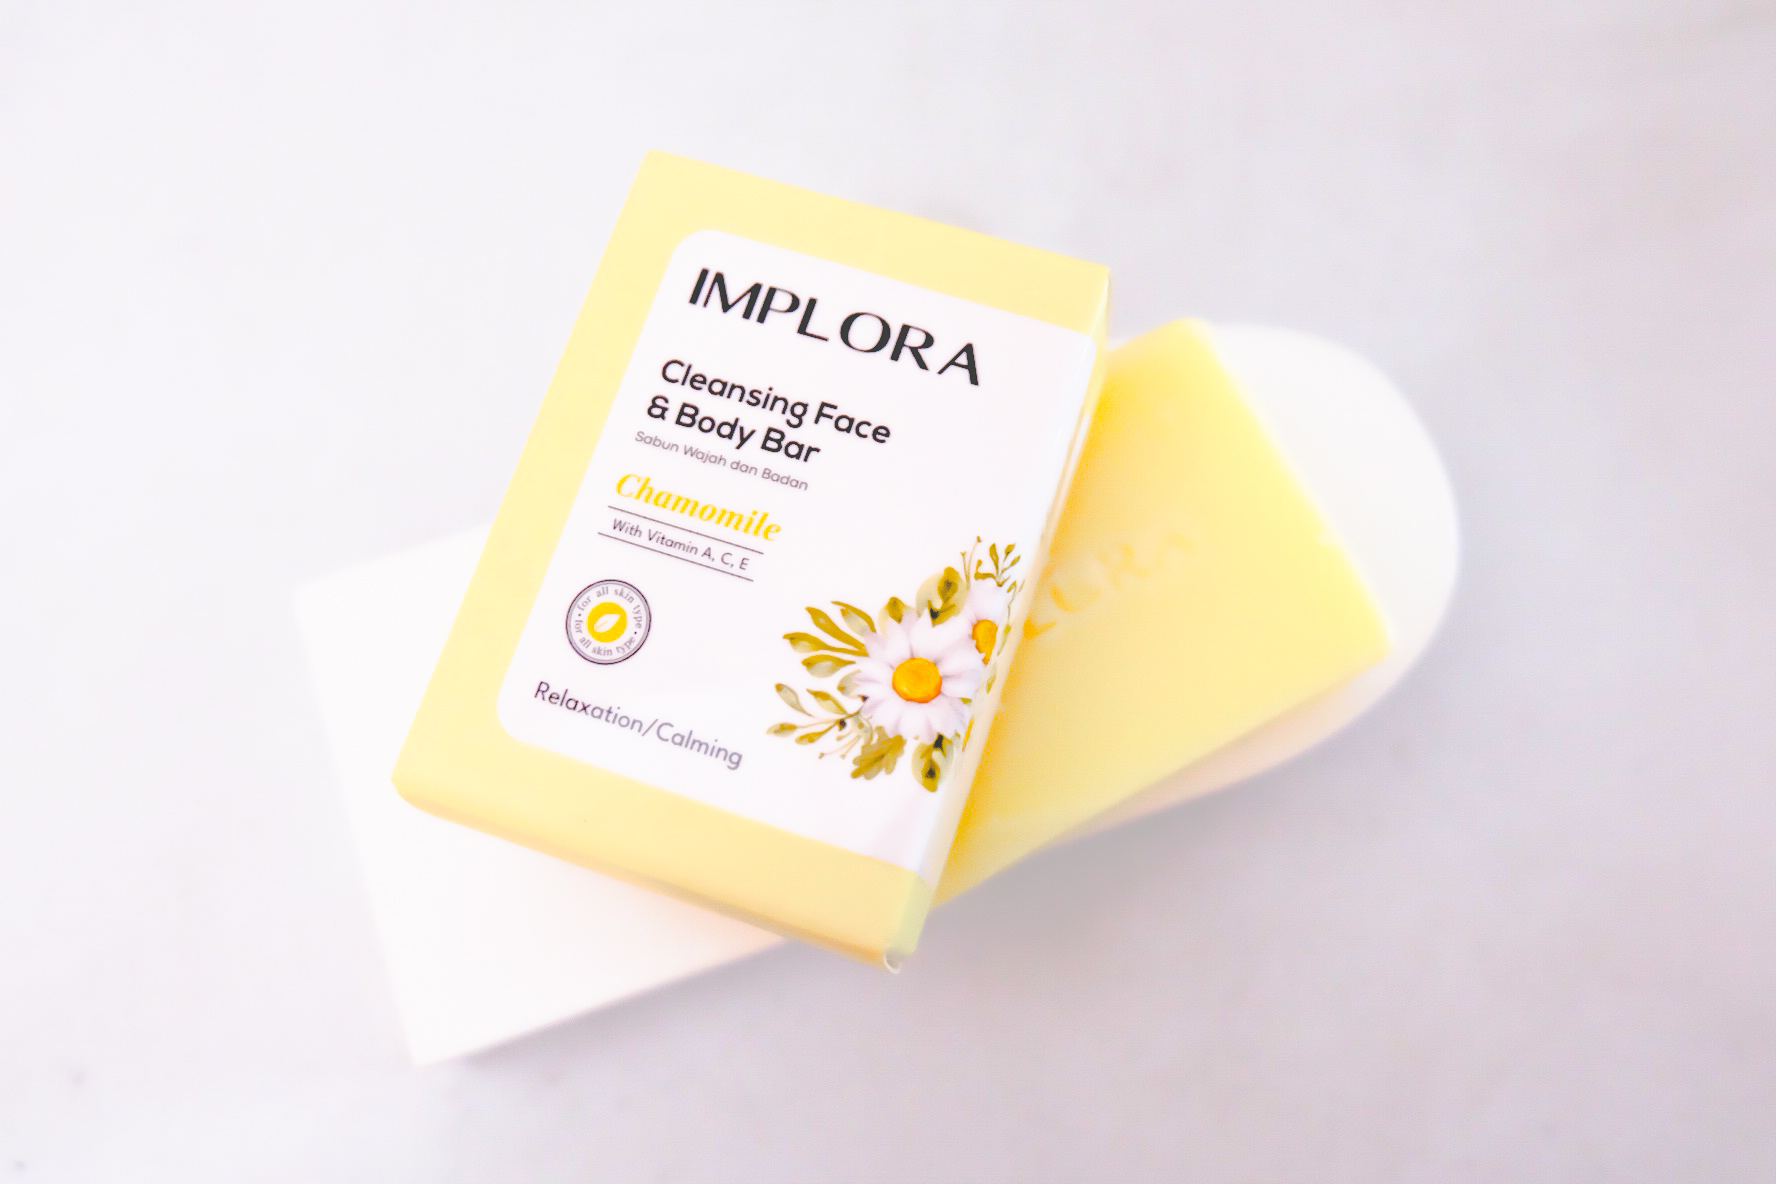 [Review] Implora Cleansing Face & Body Bar Chamomile